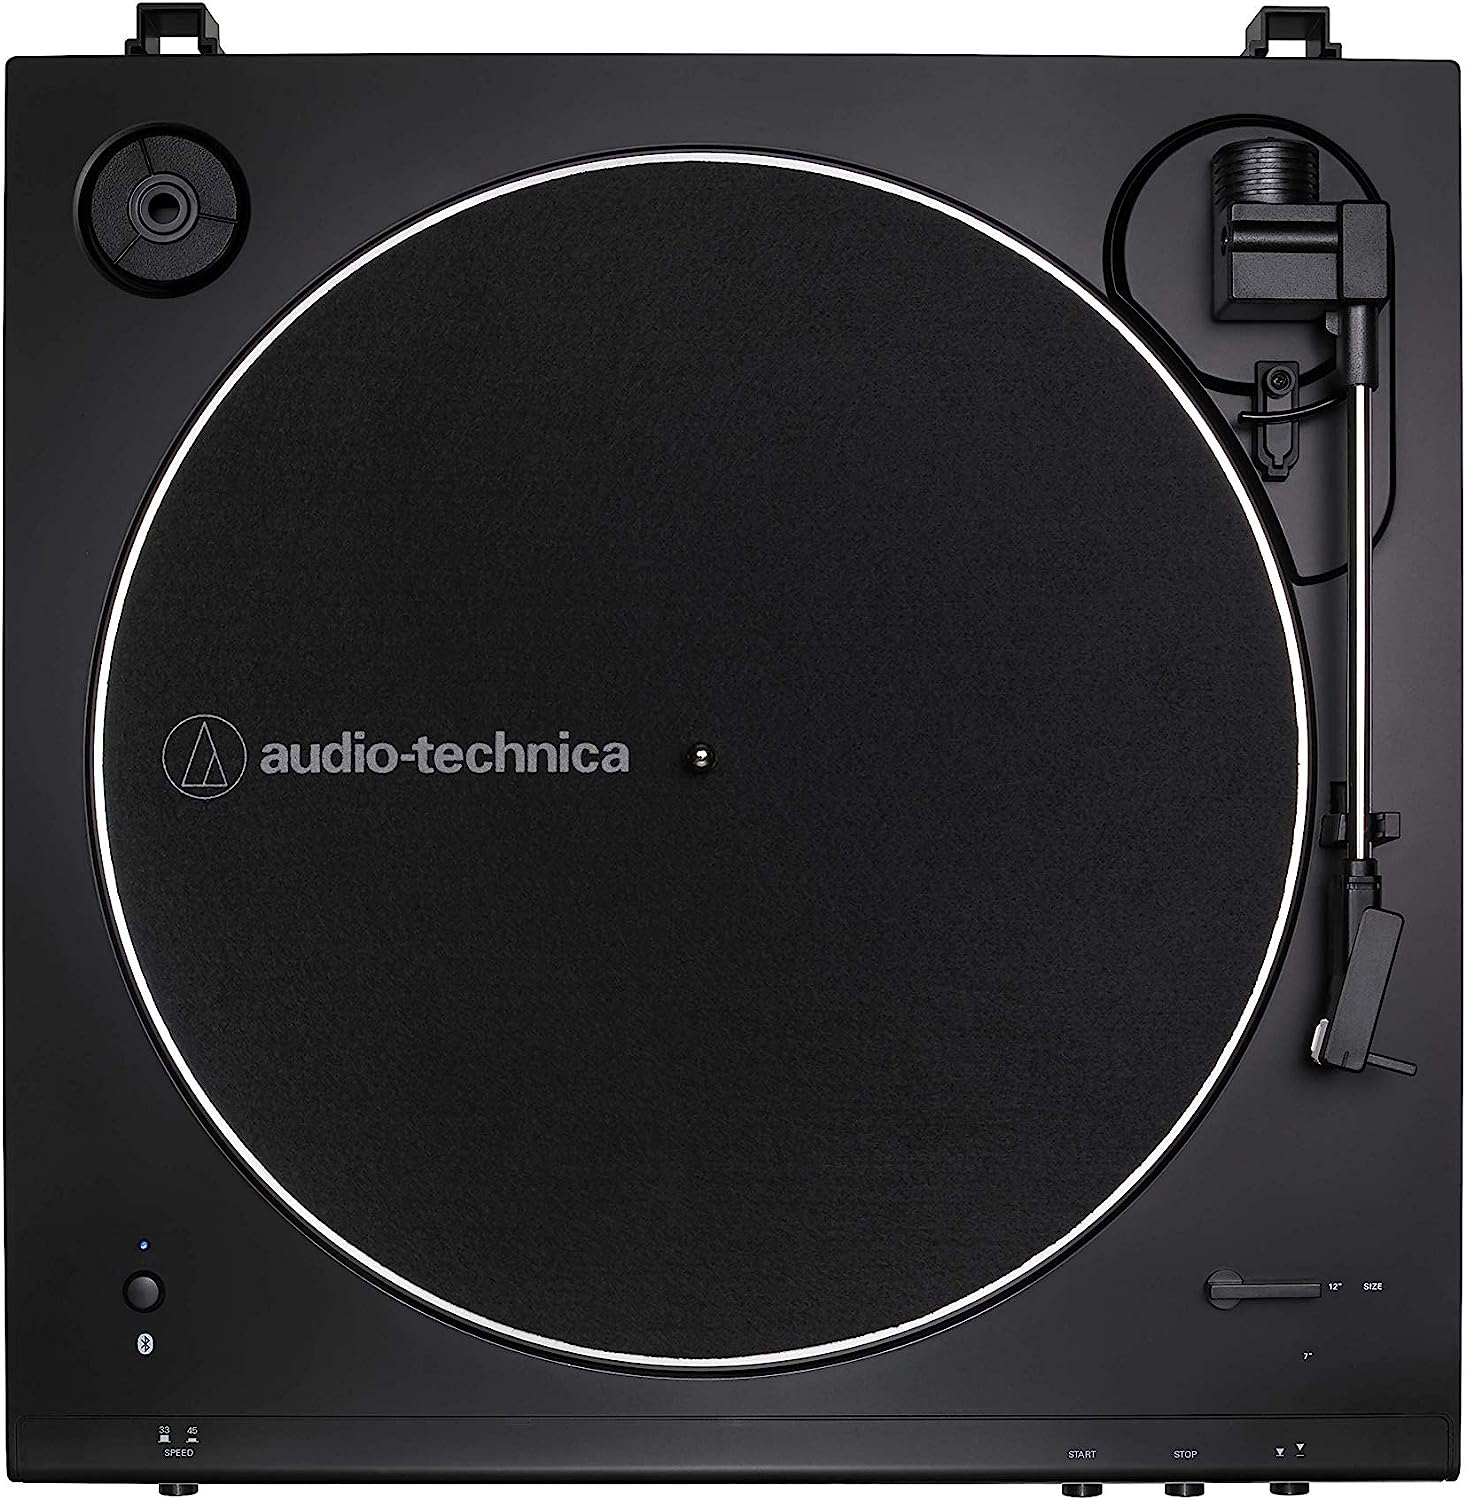  Audio-Technica AT-LP60XBT-BK Fully Automatic Bluetooth Belt-Drive Stereo Turntable, Black, Hi-Fi, 2 Speed, Dust Cover, Anti-Resonance, Die-cast Aluminum Platter top view